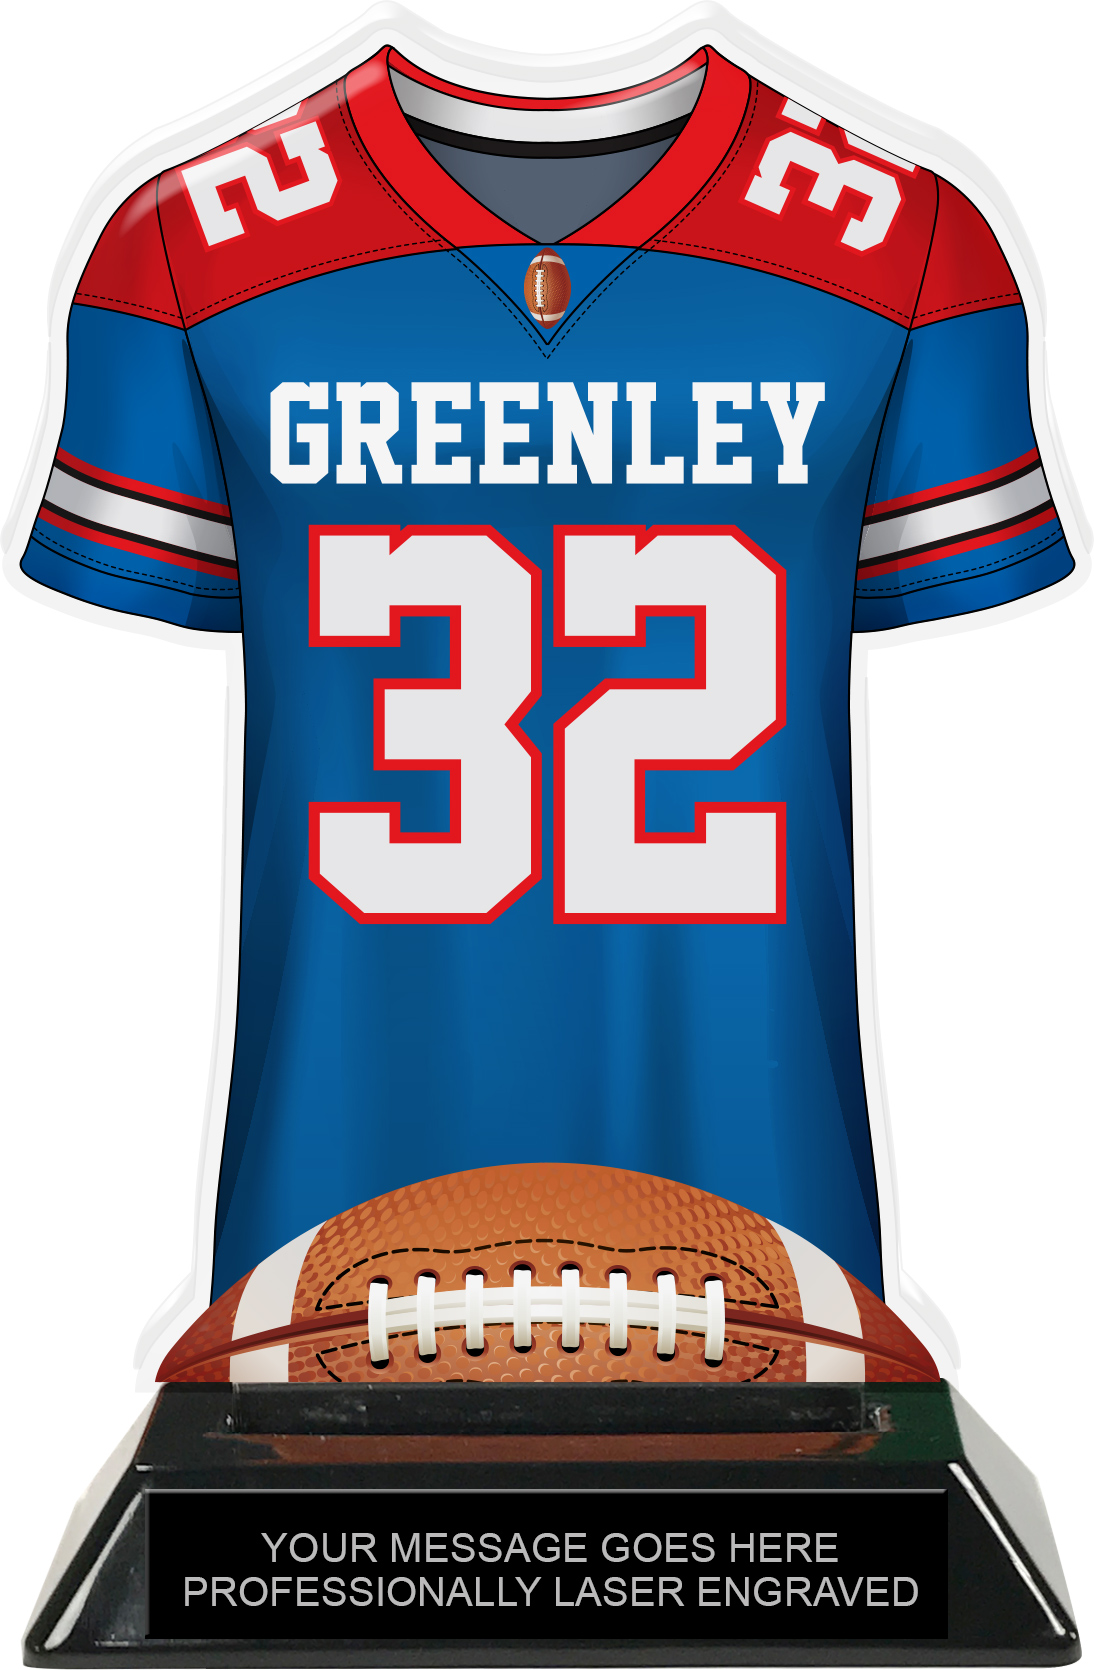 red white and blue football jersey